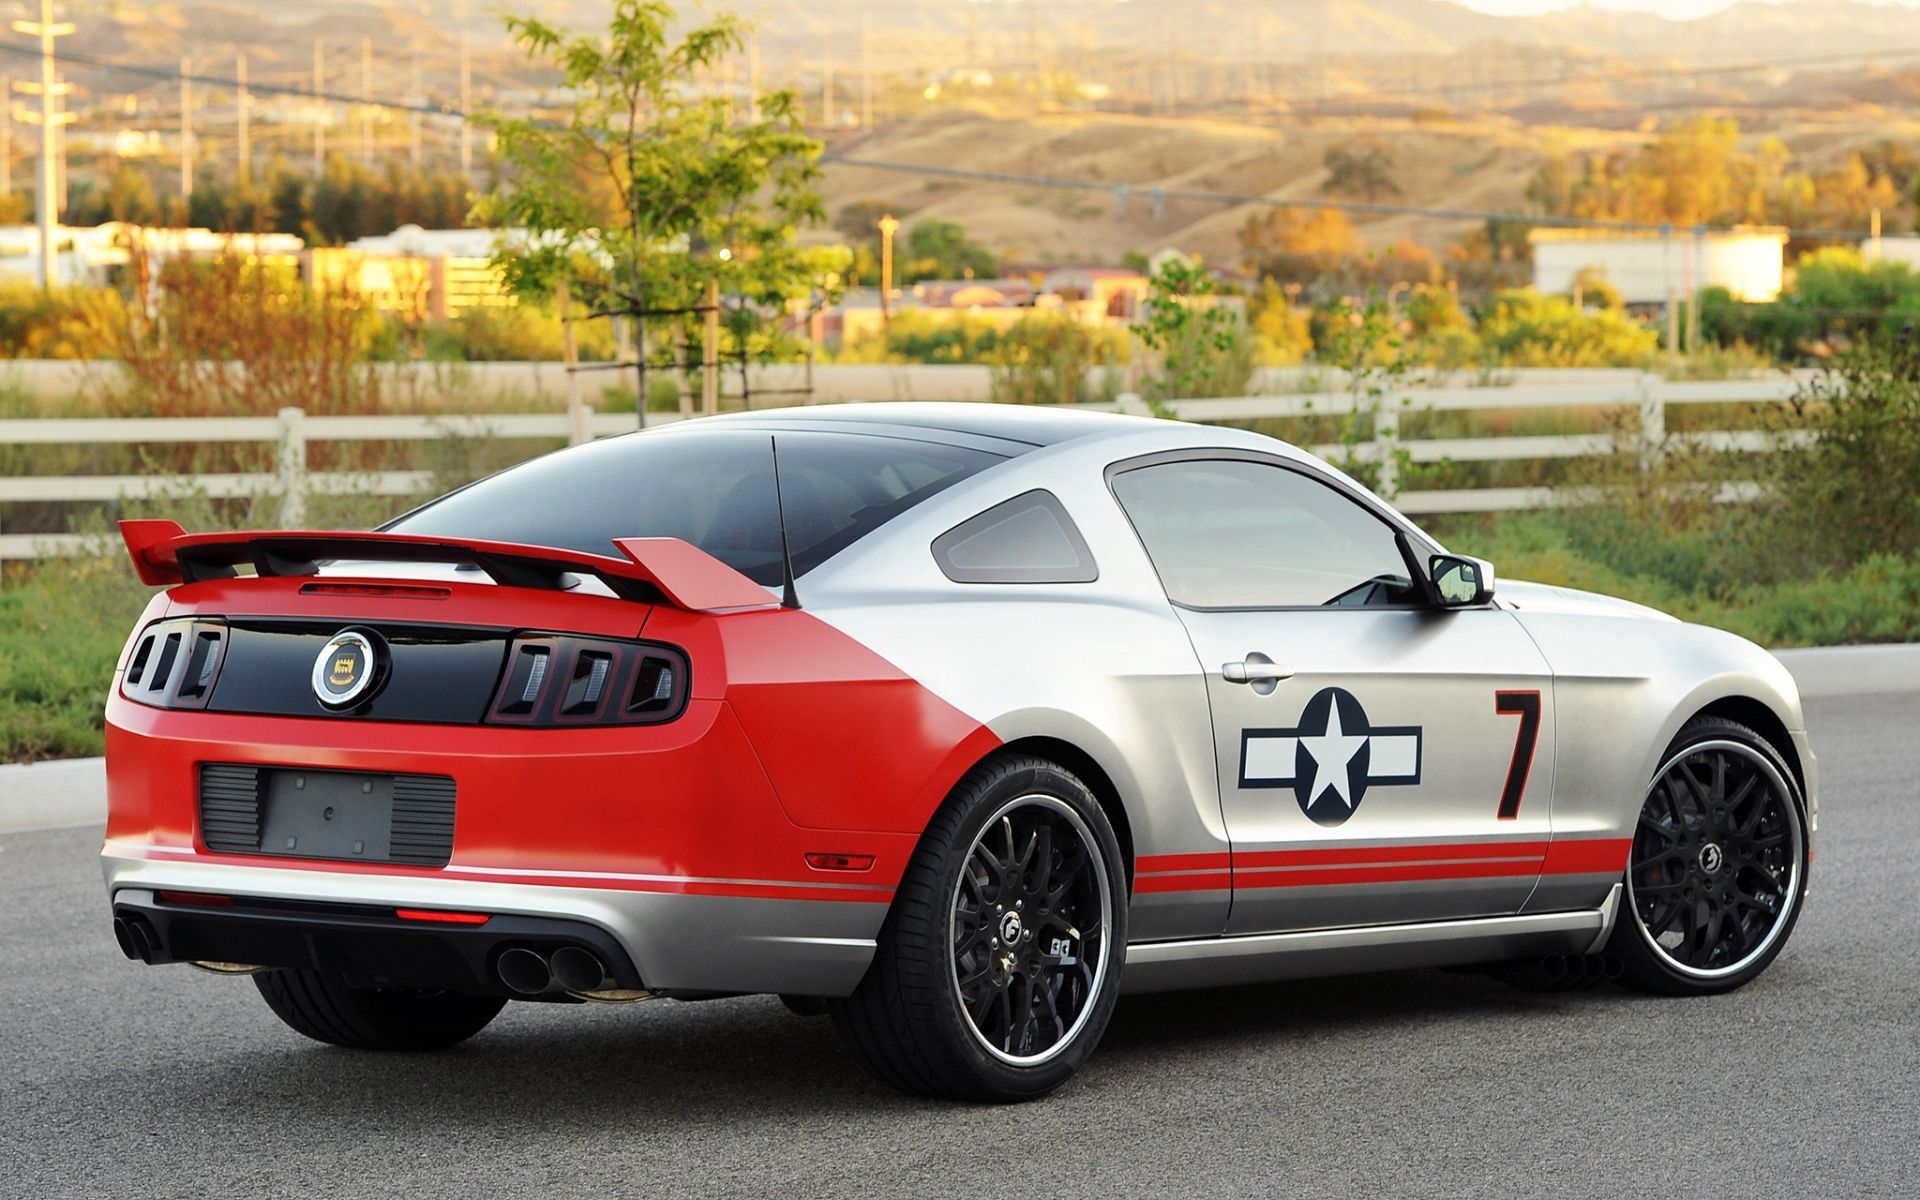 mustang, background, tuning, ford, cars, grey, back view, rear view, gt, muscle car, coupe, compartment, red tails